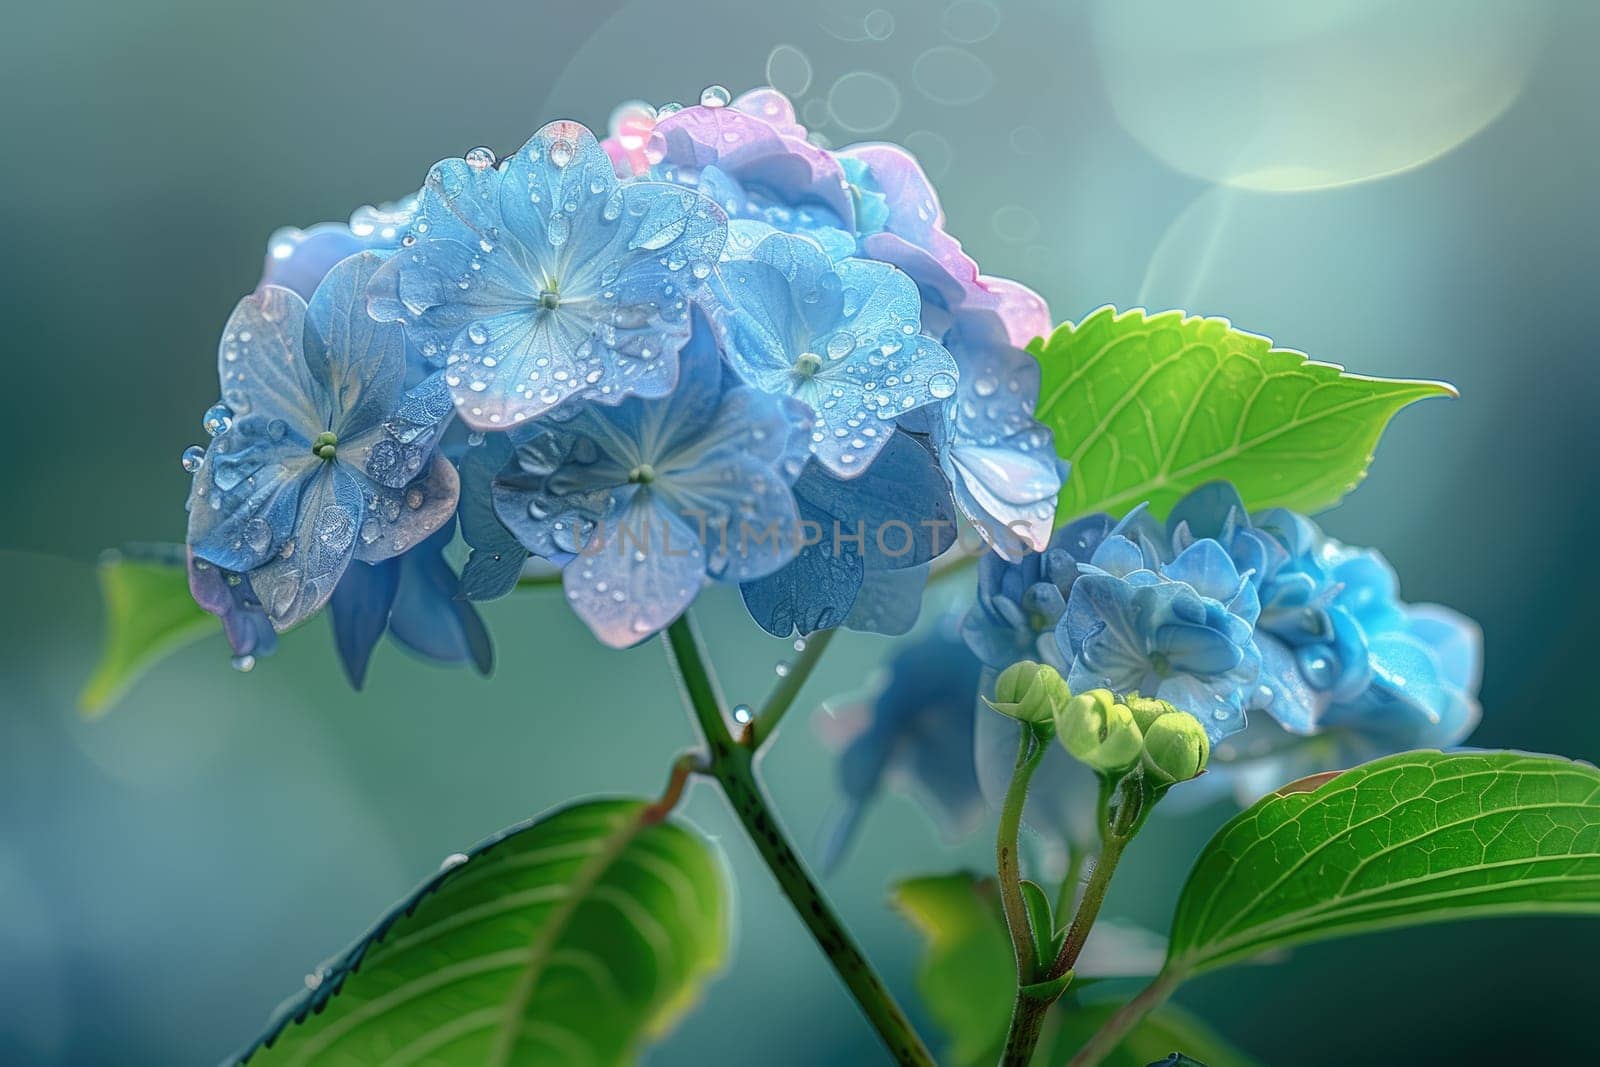 Close up view. Beautiful colors Hydrangea isolated with drops of water on the petals